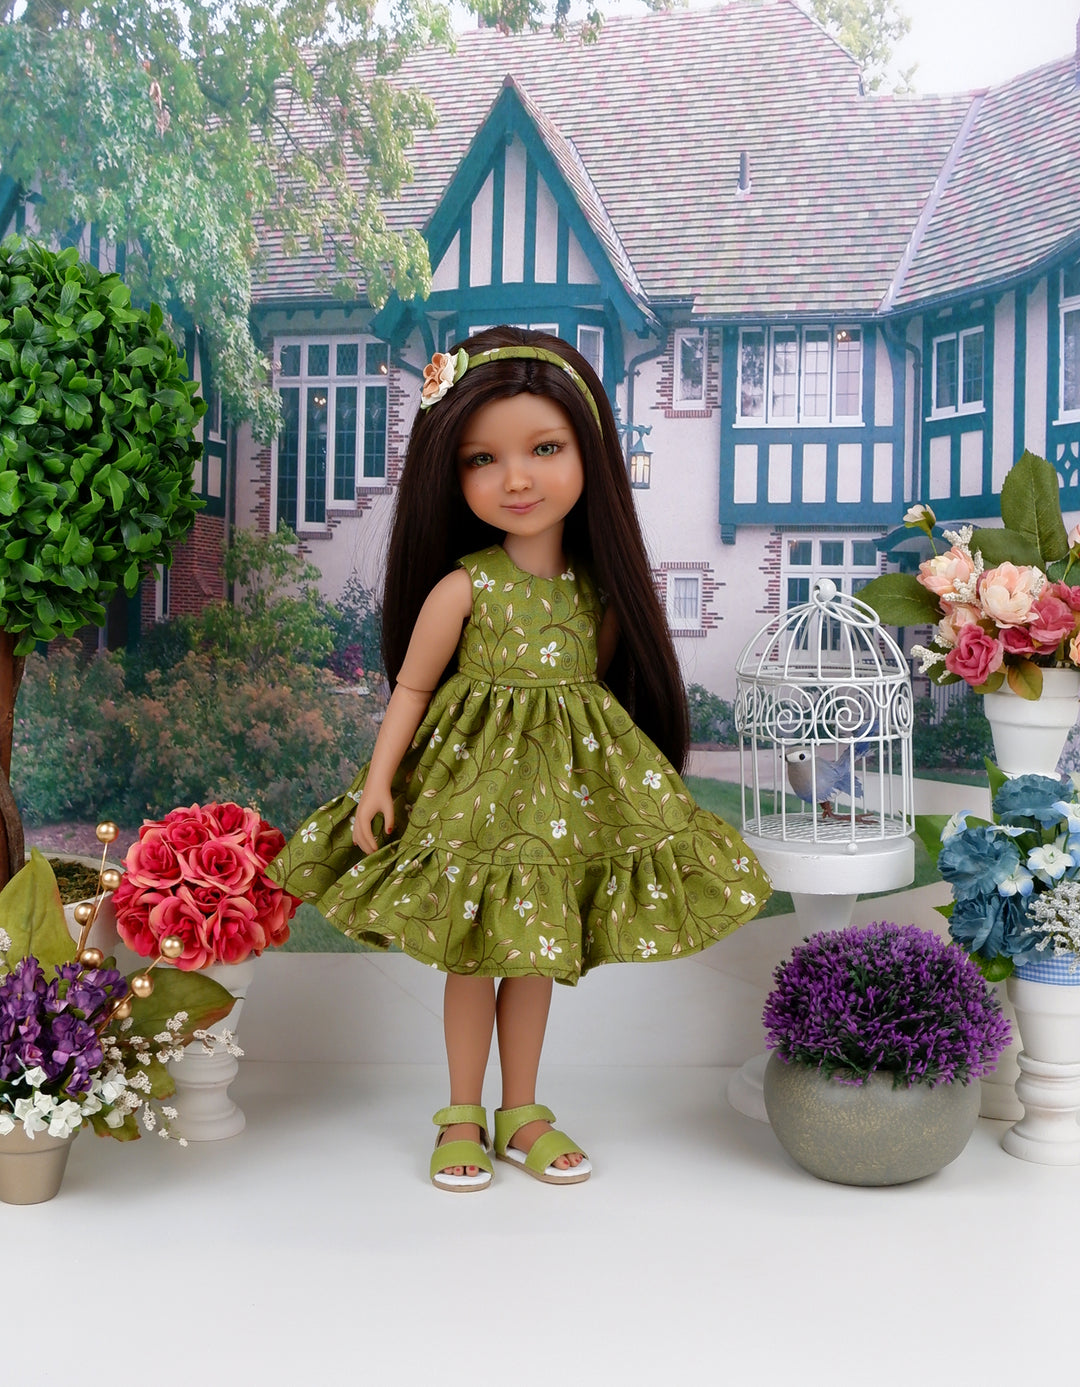 Beautiful Meadow - dress & sweater with shoes for Ruby Red Fashion Friends doll